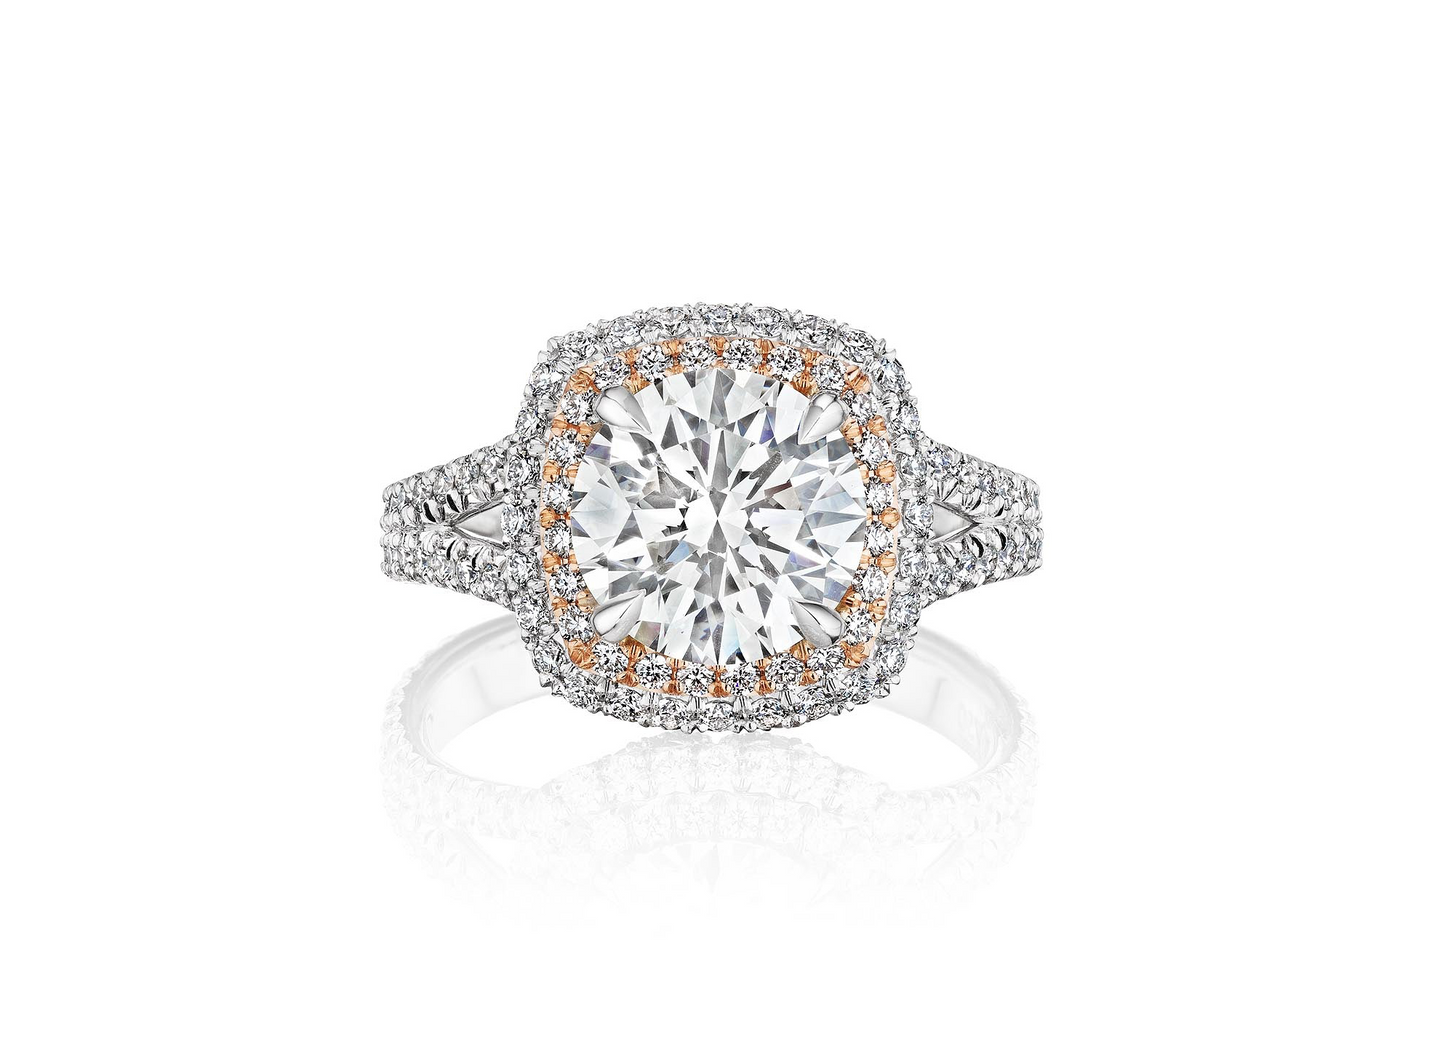 Fink's Exclusive Round Diamond Double Halo Engagement Ring